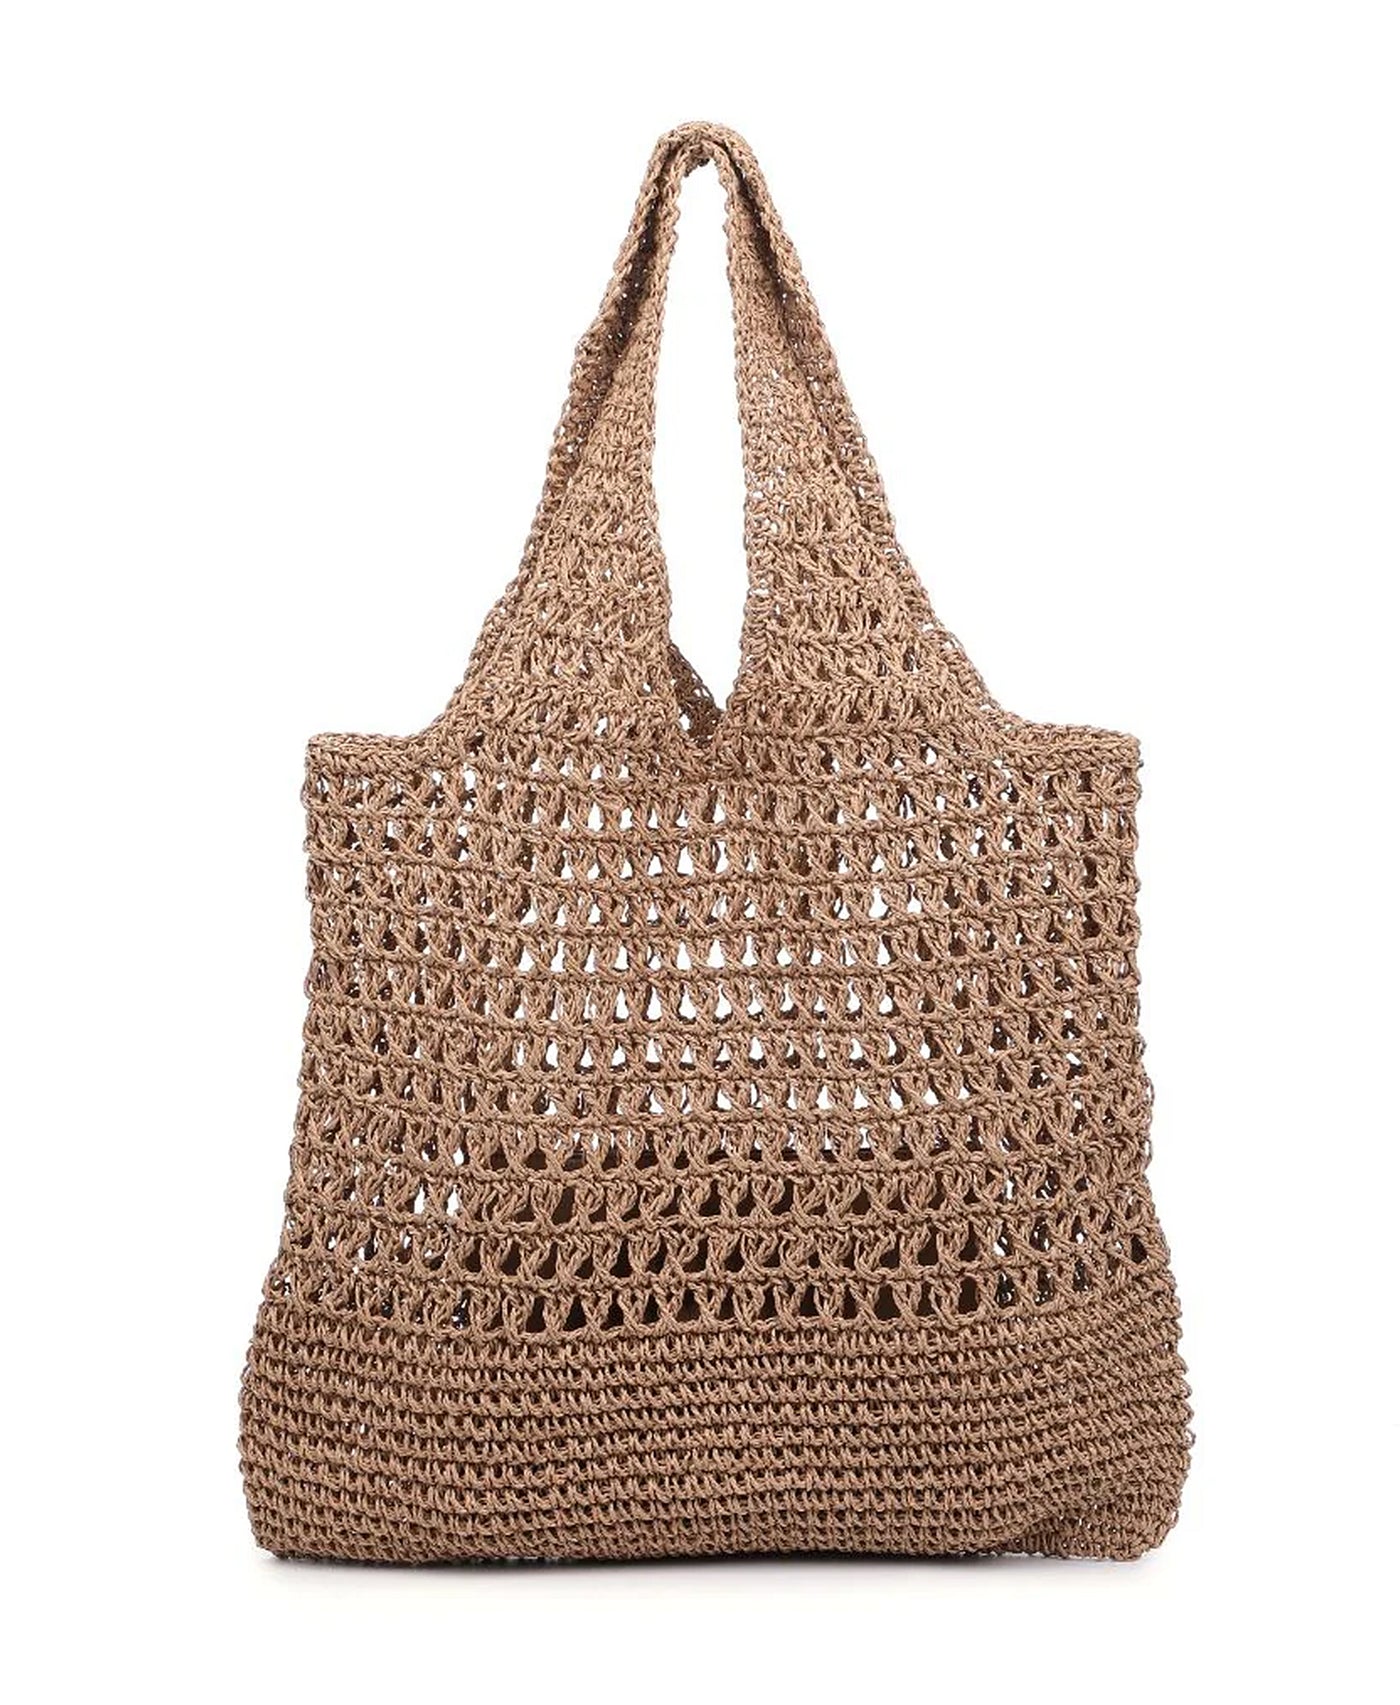 Woven Straw Tote Bag w/ Pouch view 1